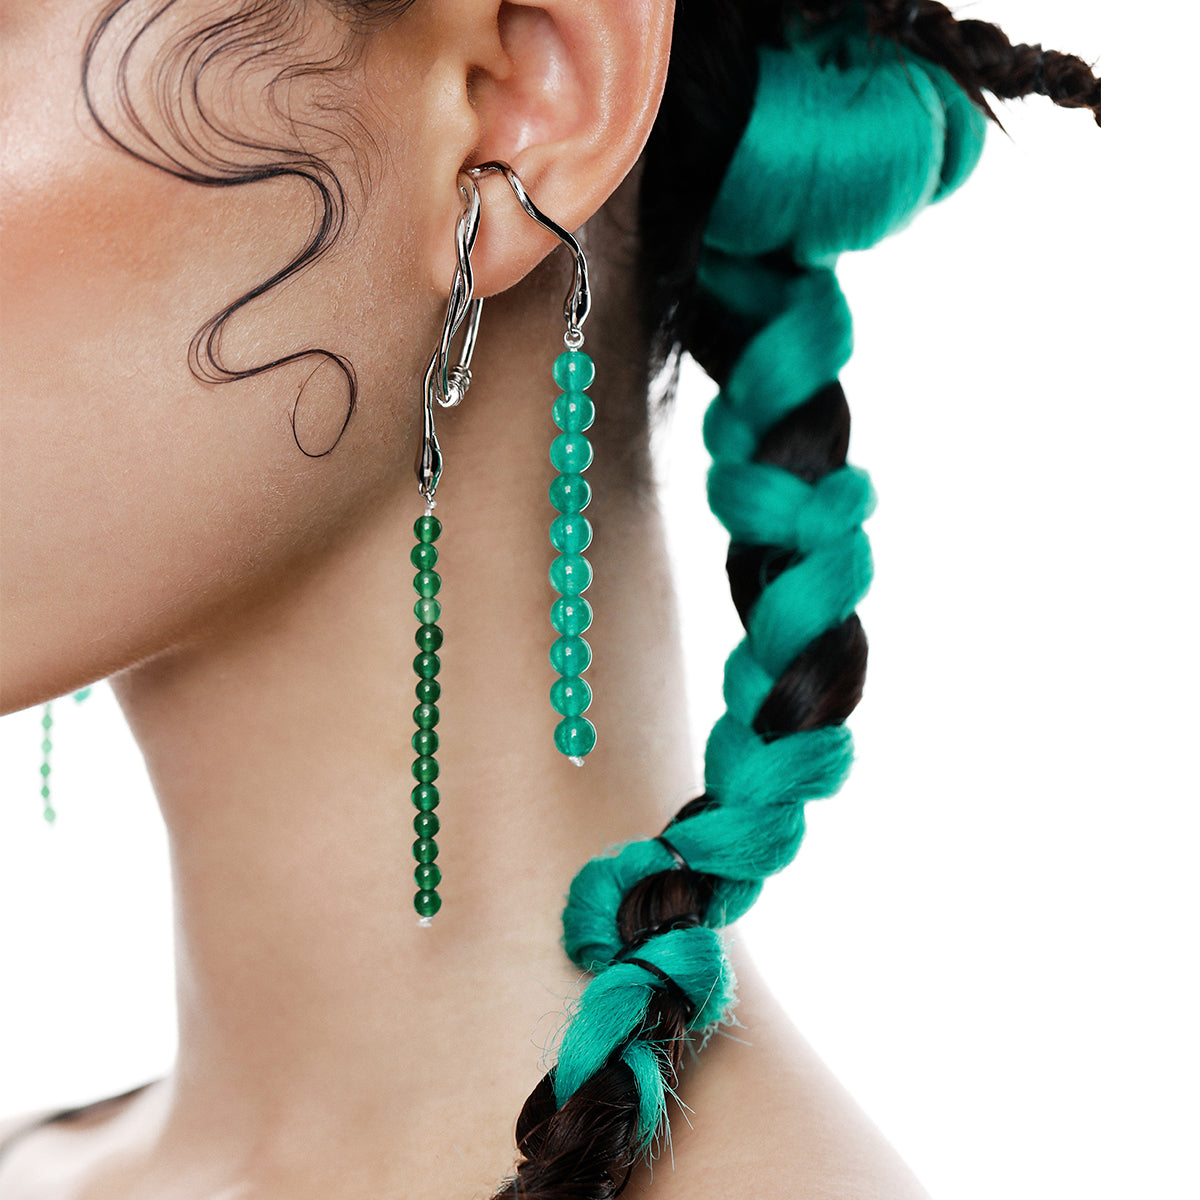 Tassel Earrings with Snake and Beads